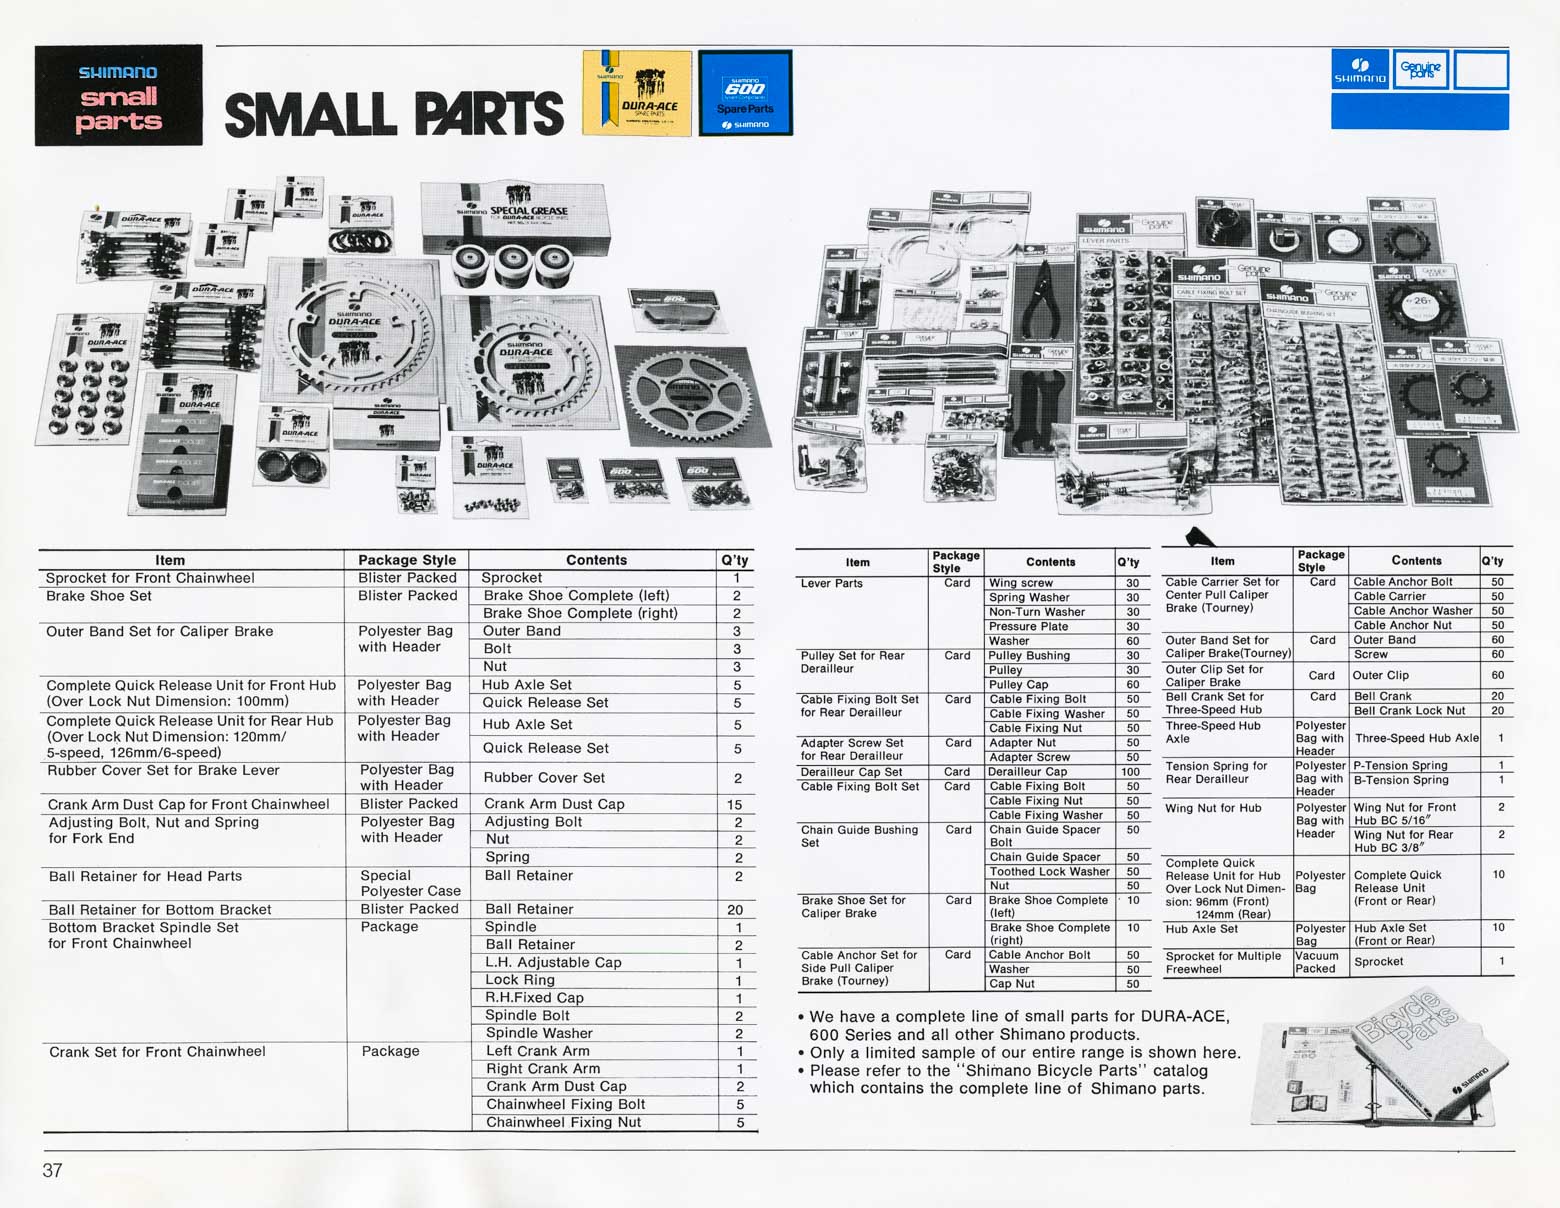 Shimano Bicycle System Components (1977) page 37 main image